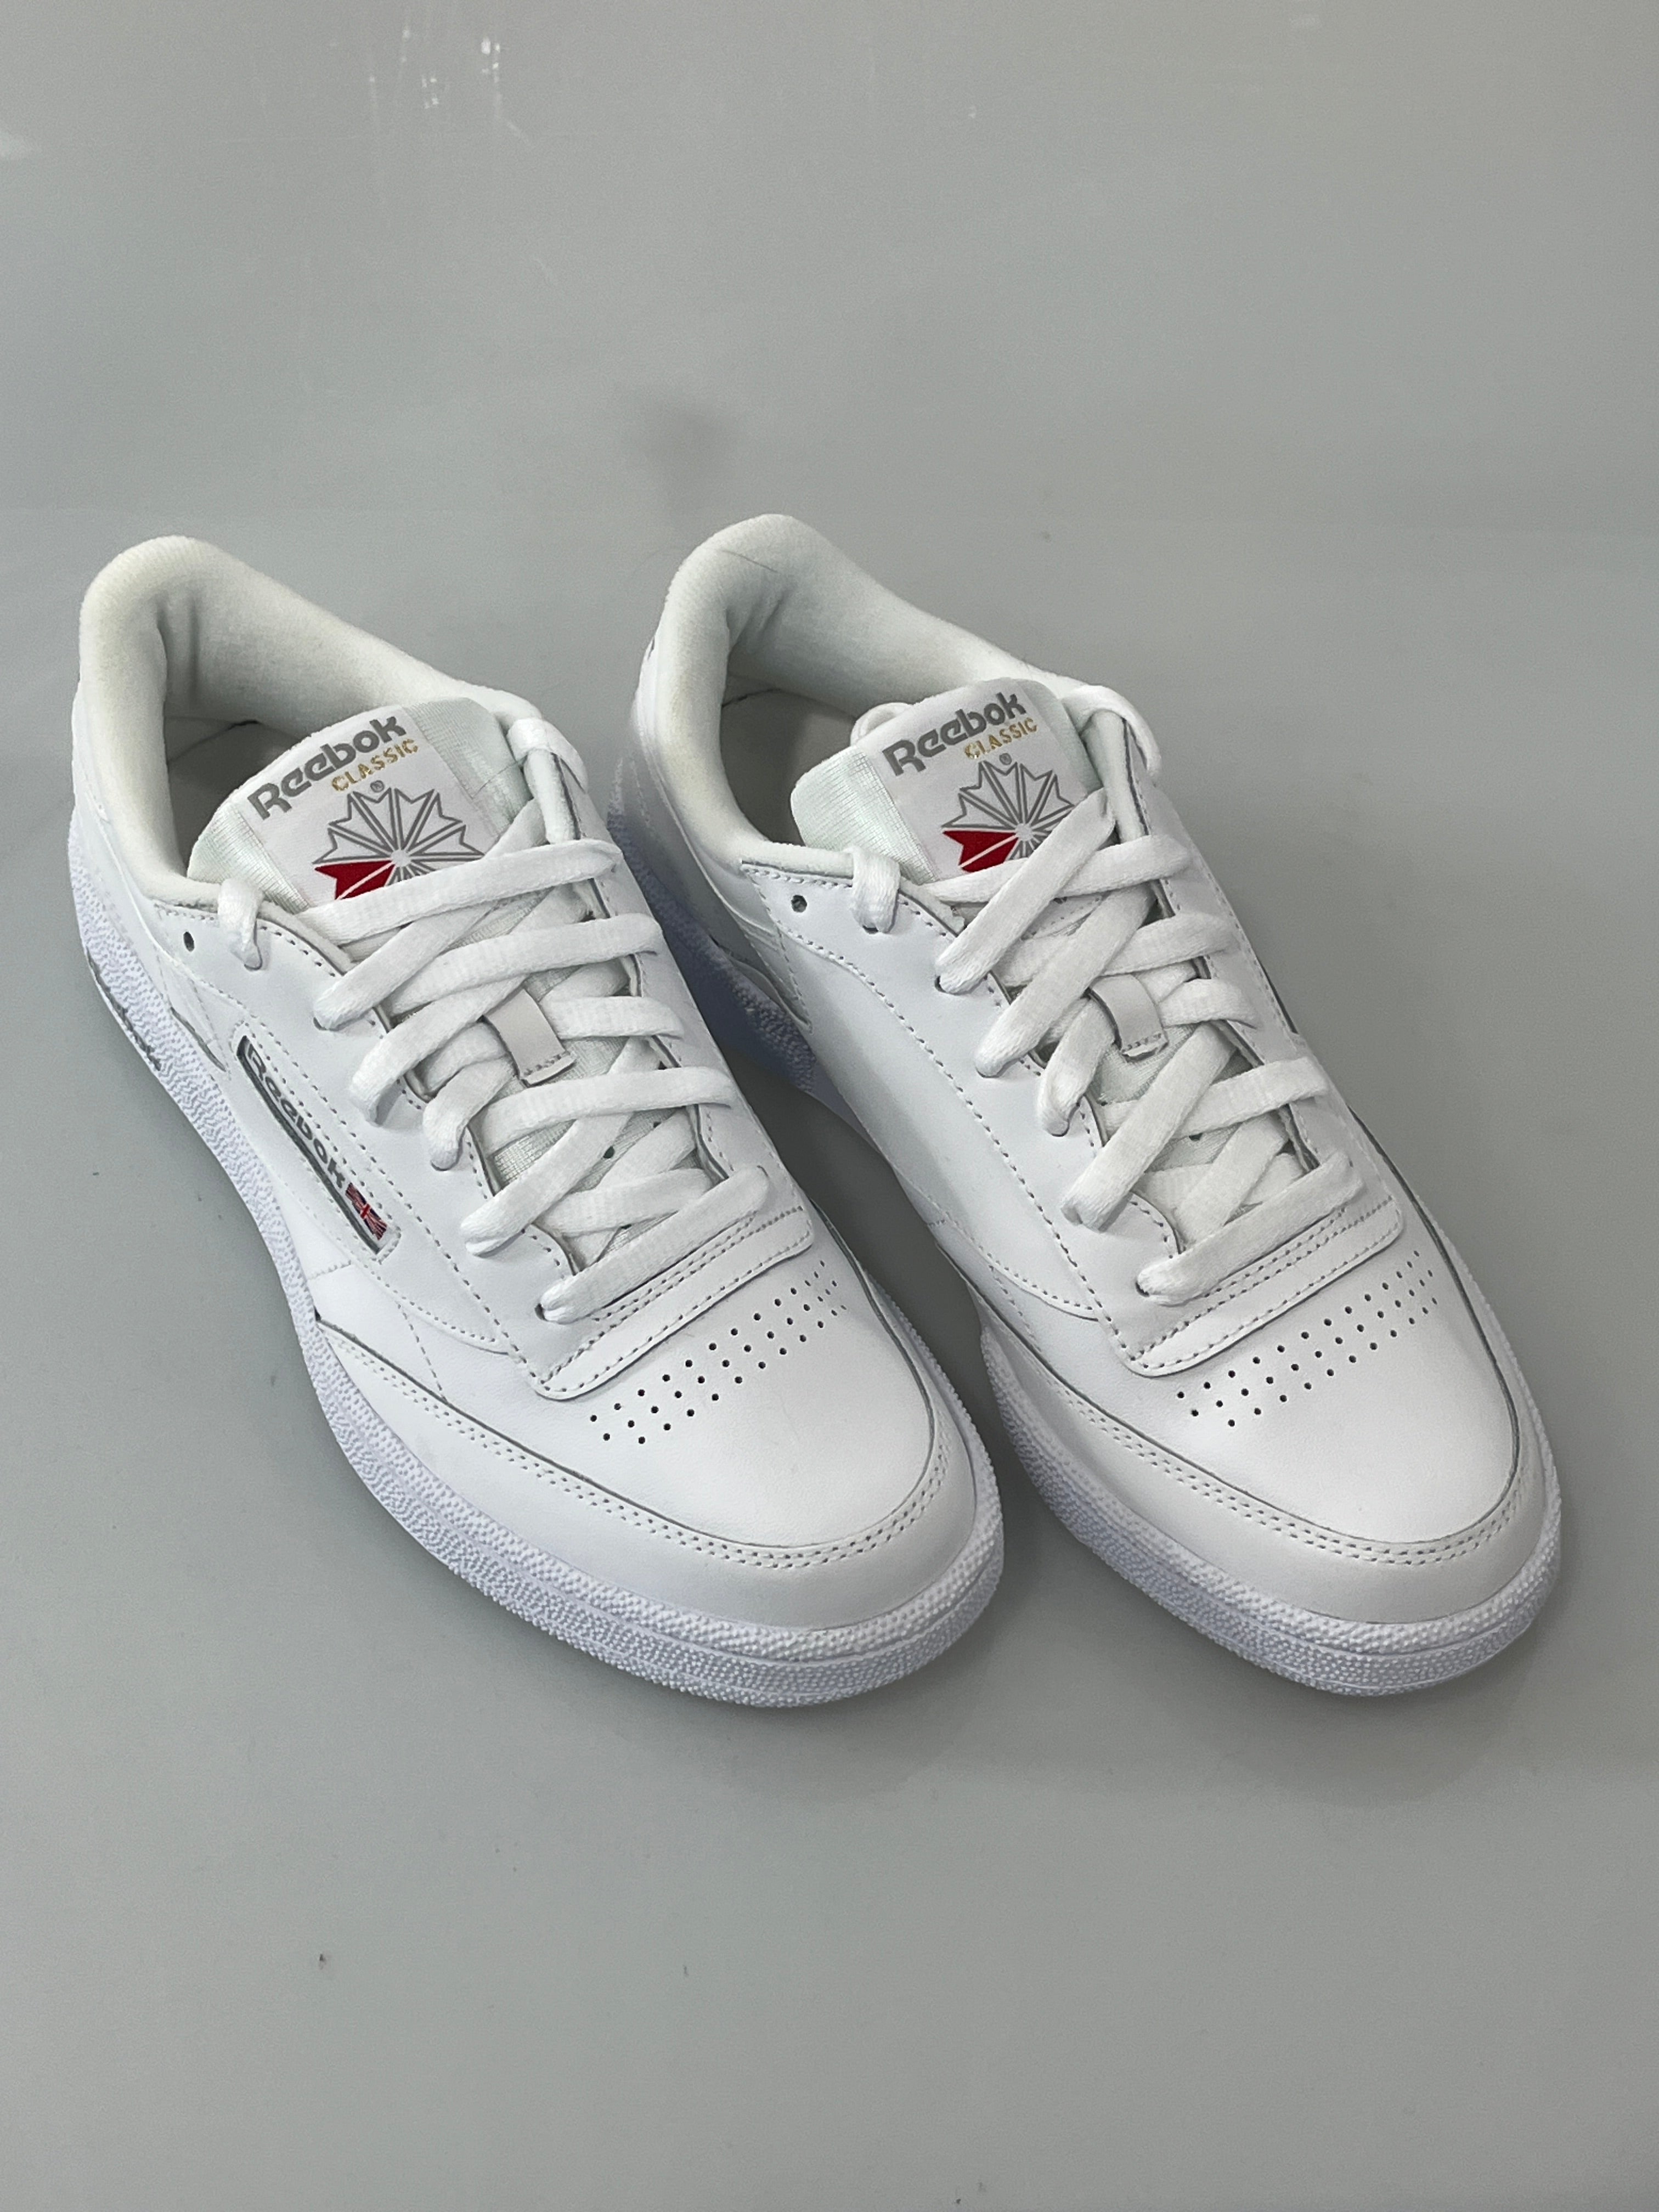 Reebok Club C 85 Shoes – The Locals Sale